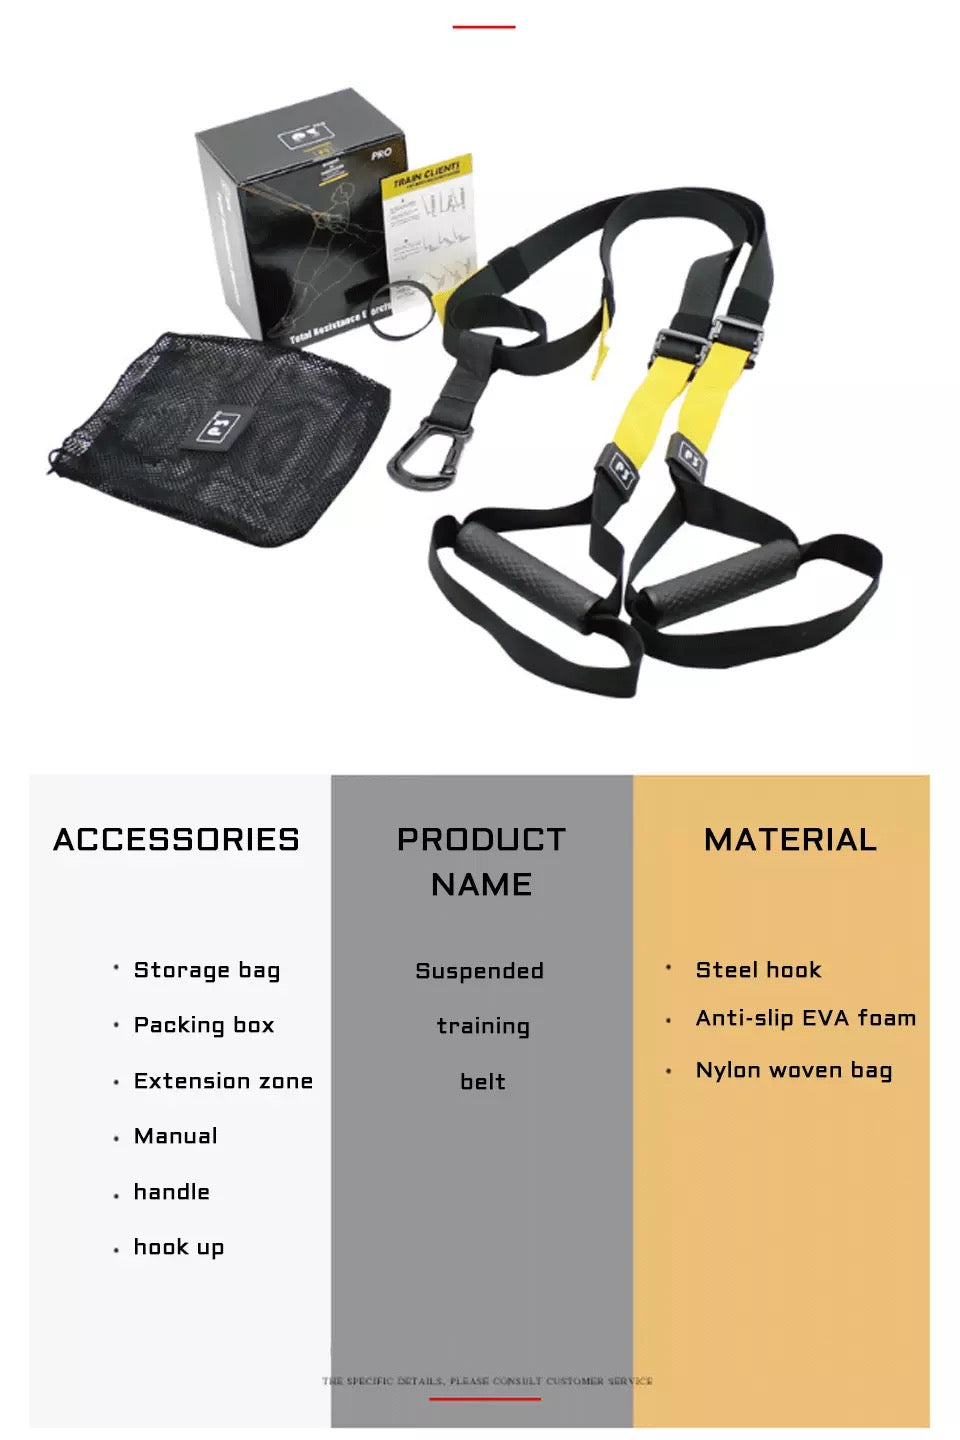 TRX All In One Home Gym Bundle-Includes All-In-One Suspension Trainer